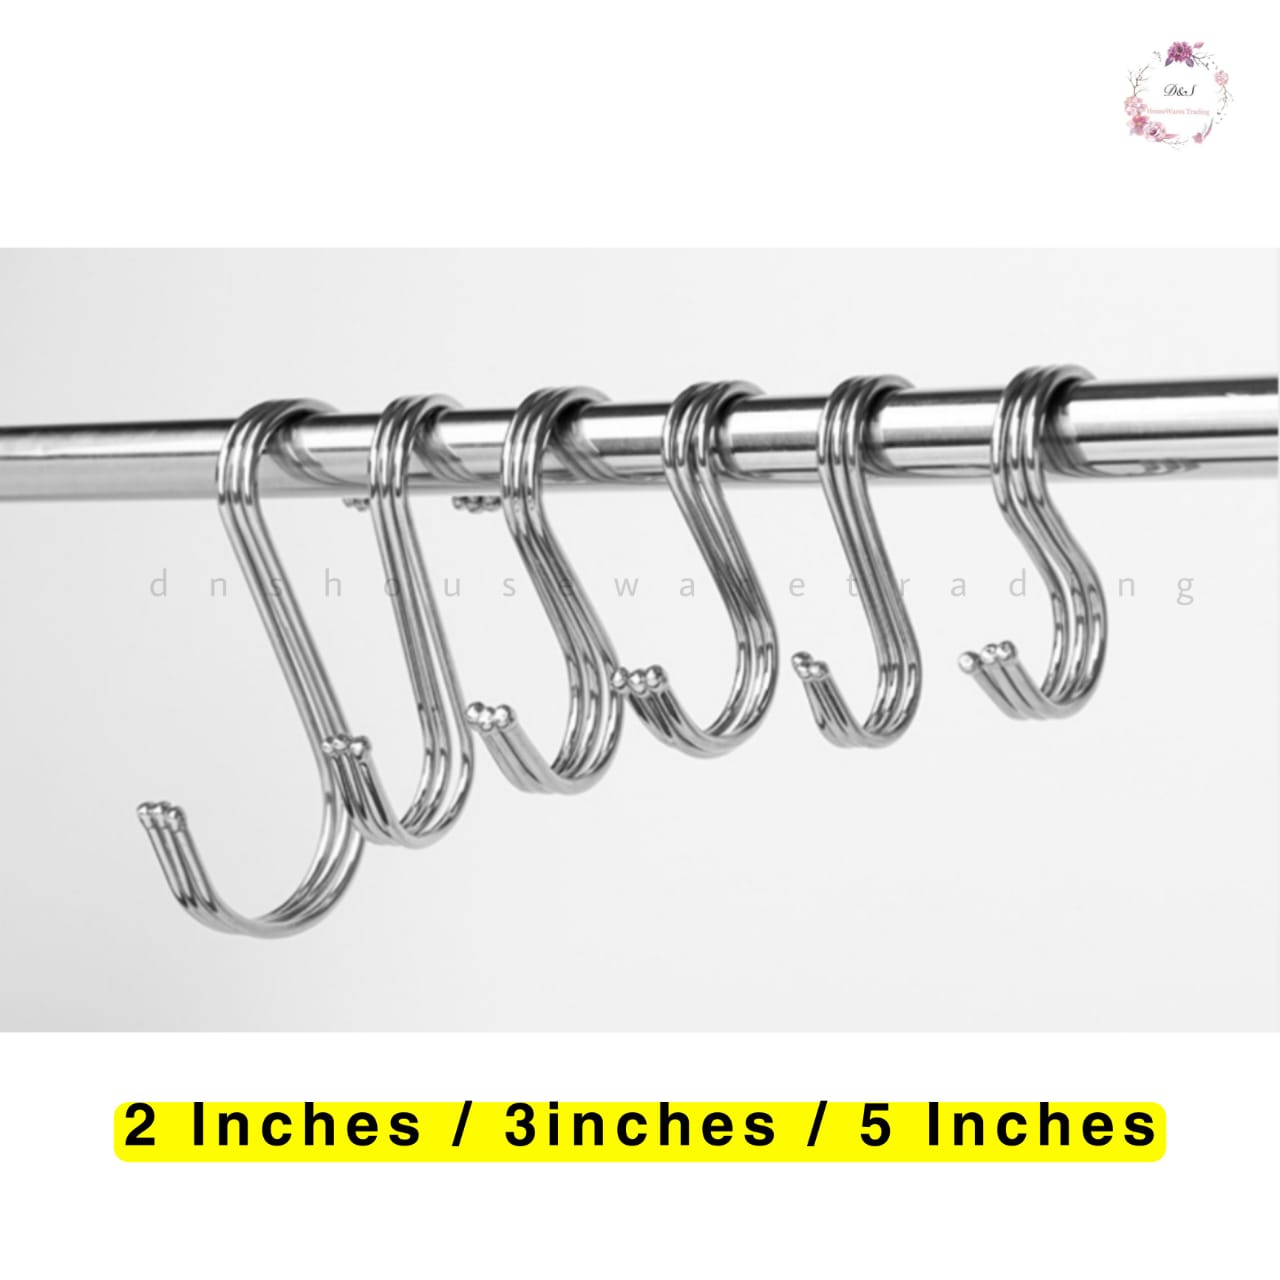 2 / 3 / 5 Inches Strong Load-bearing Stainless Steel S Hook Cangkuk S 不锈钢s 挂钩黑色铁S钩s勾一体成型规格齐全多功能百货s钩